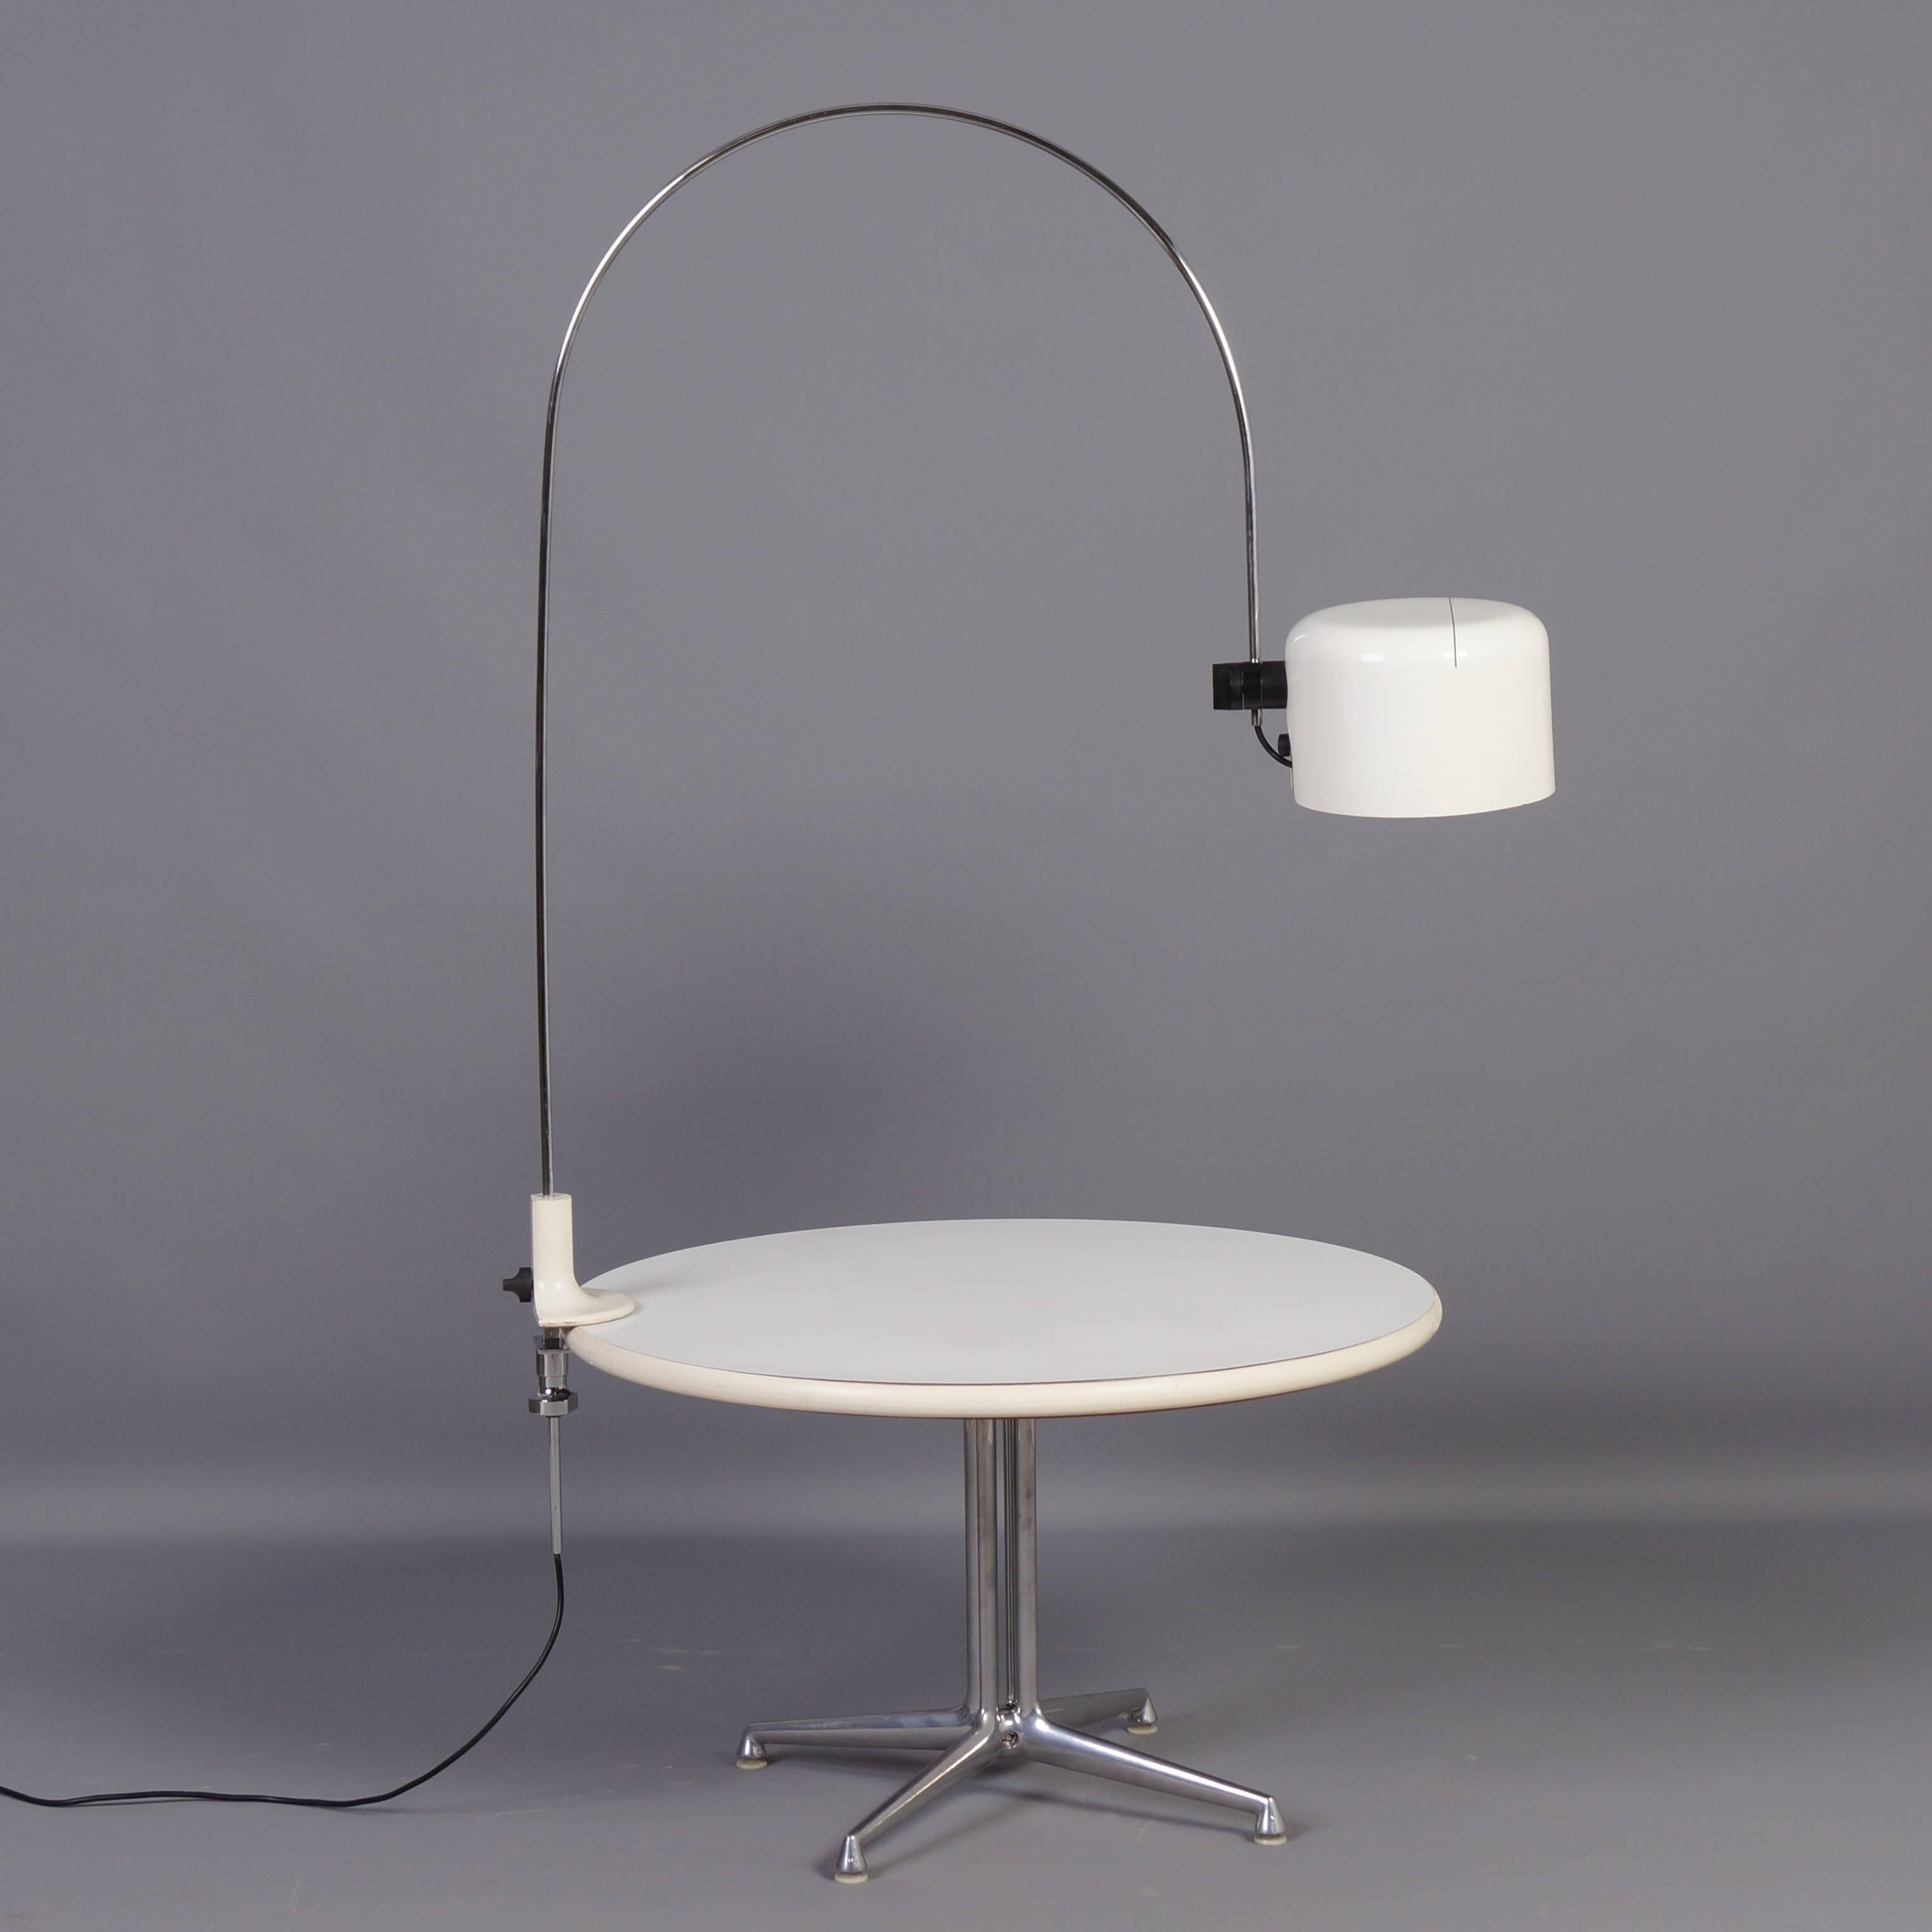 White Coupe arc lamp by Joe Colombo for Oluce, Italy, 1967. This rare vintage table clamp lamp was made with two different caps, a cylindrical cap and a semi-spherical cap. This is the version with the cylindrical cap. These lamps were made in